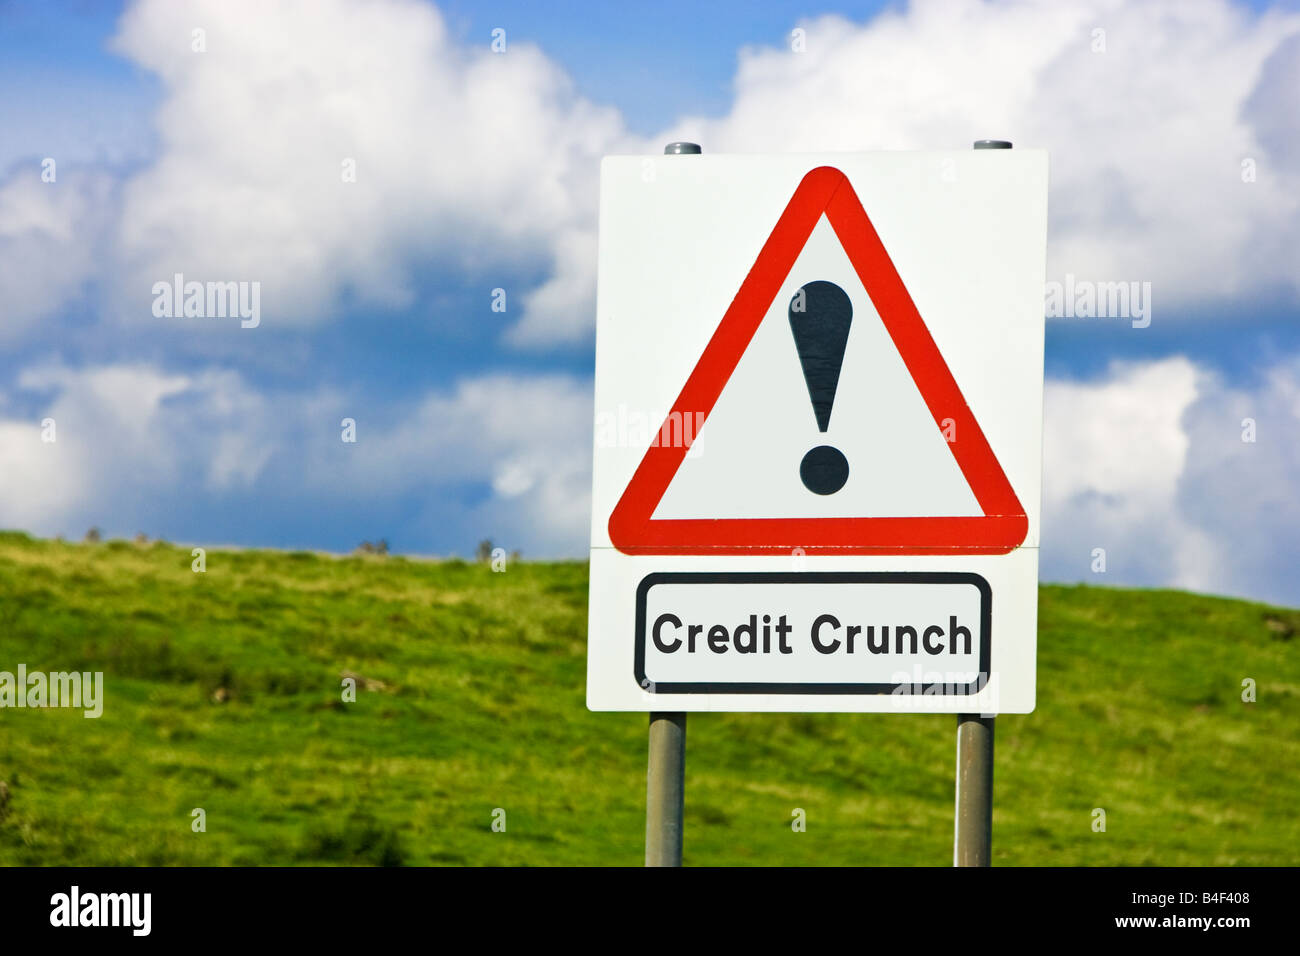 Financial concept warning of Credit Crunch England UK Stock Photo